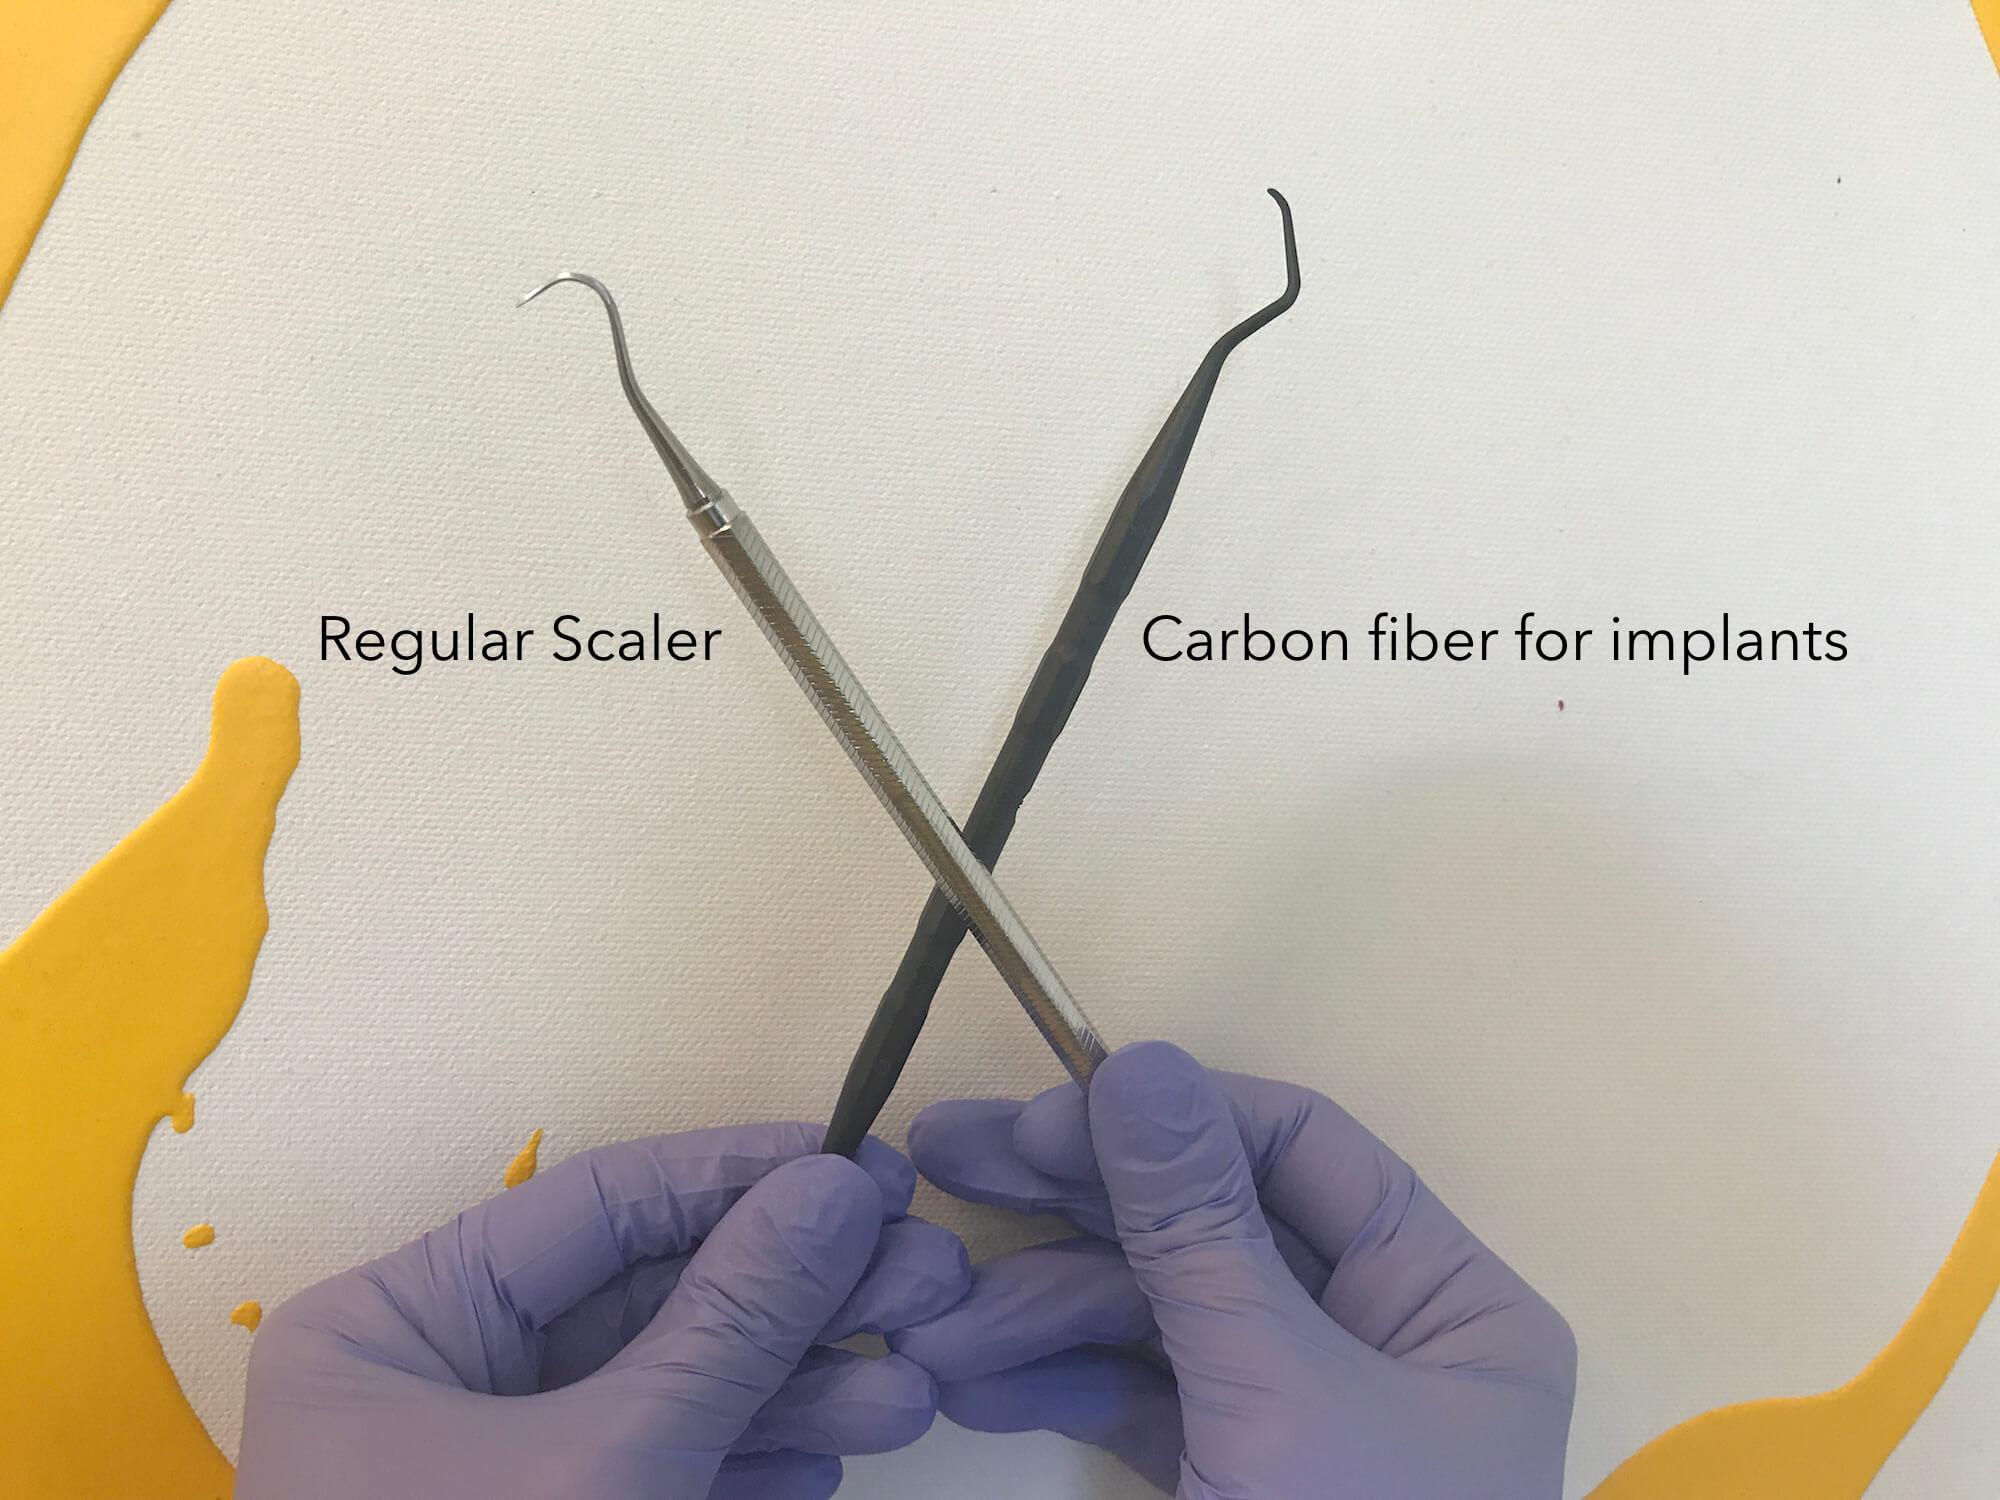 Differences between Regular Scaler and Carbon fiber for implants